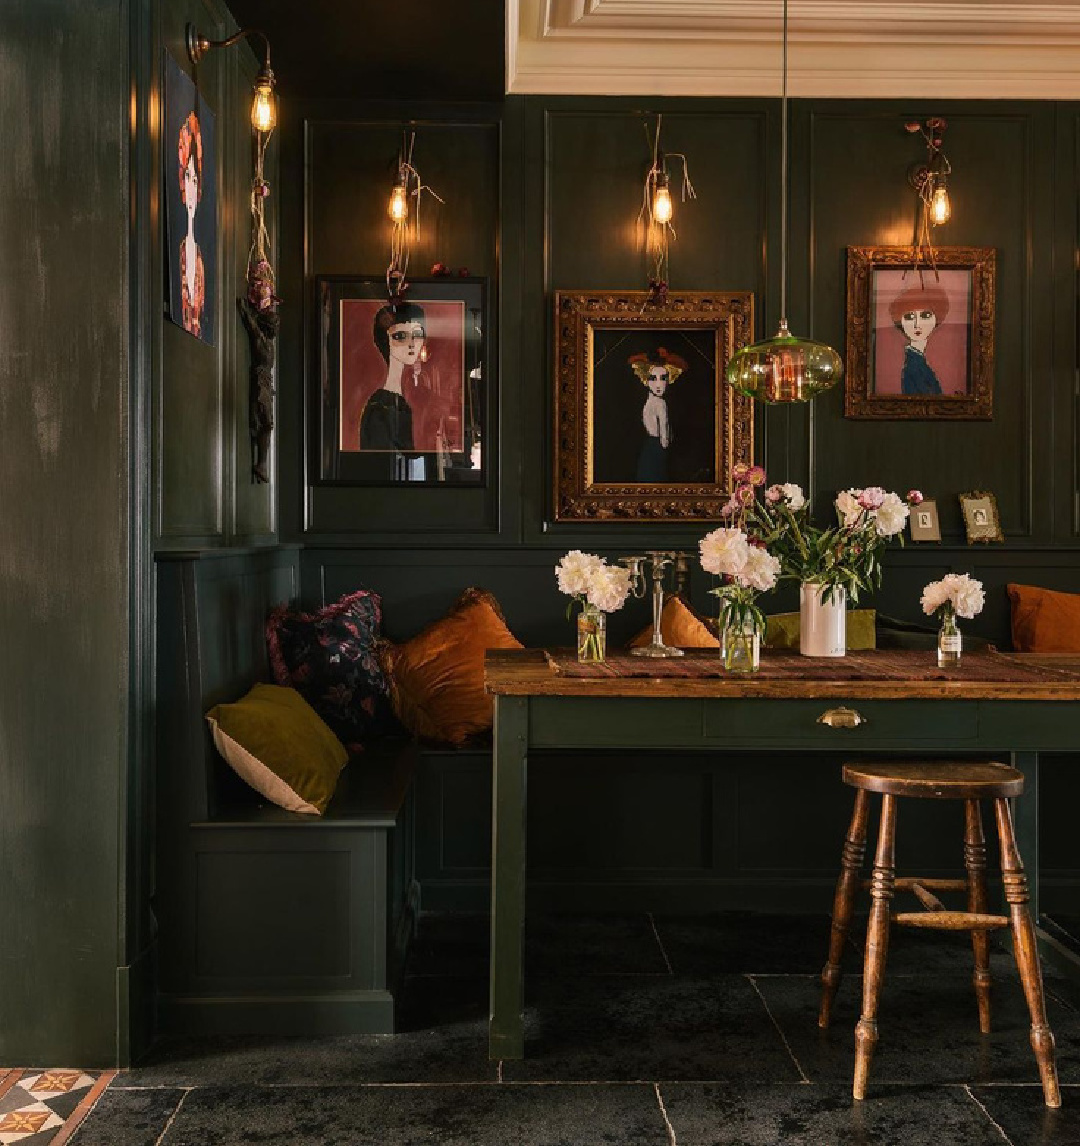 Moody dark green painted paneled walls and furniture in a kitchen dining area with industrial sconces and bespoke design - deVOL.